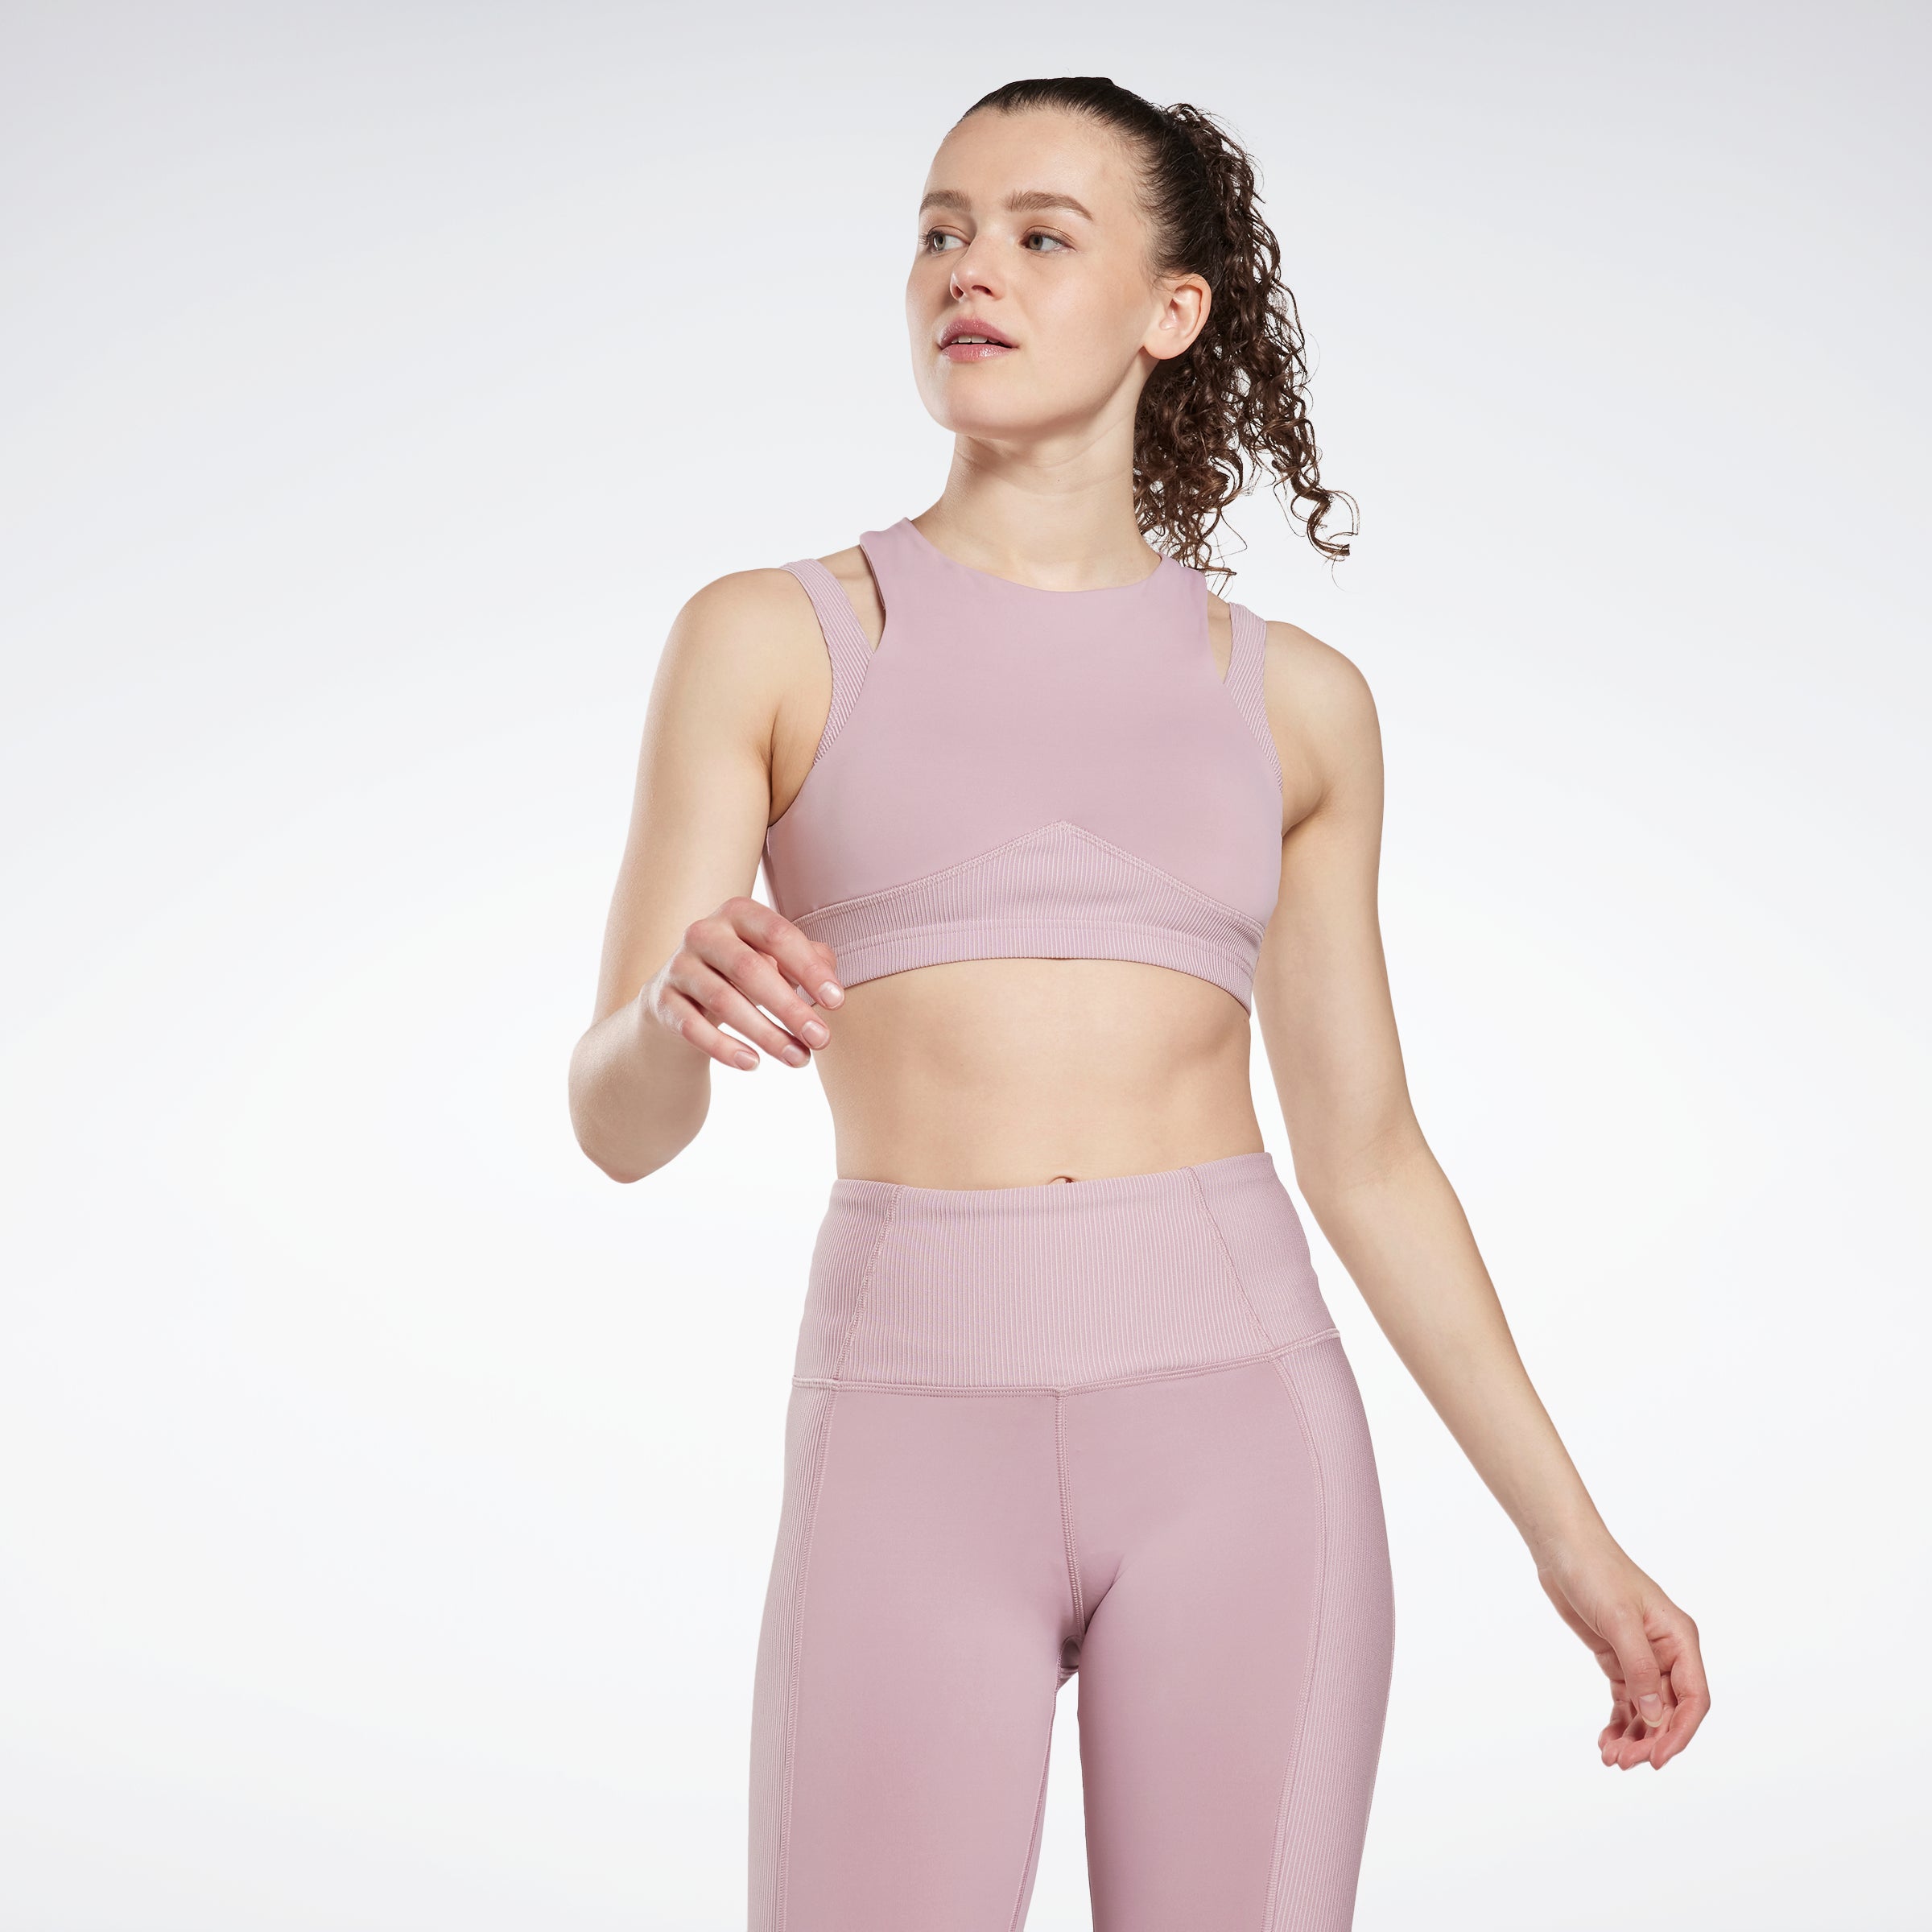 Fashion Look Featuring Reebok Activewear Tops and Avia Tops by retailfavs -  ShopStyle